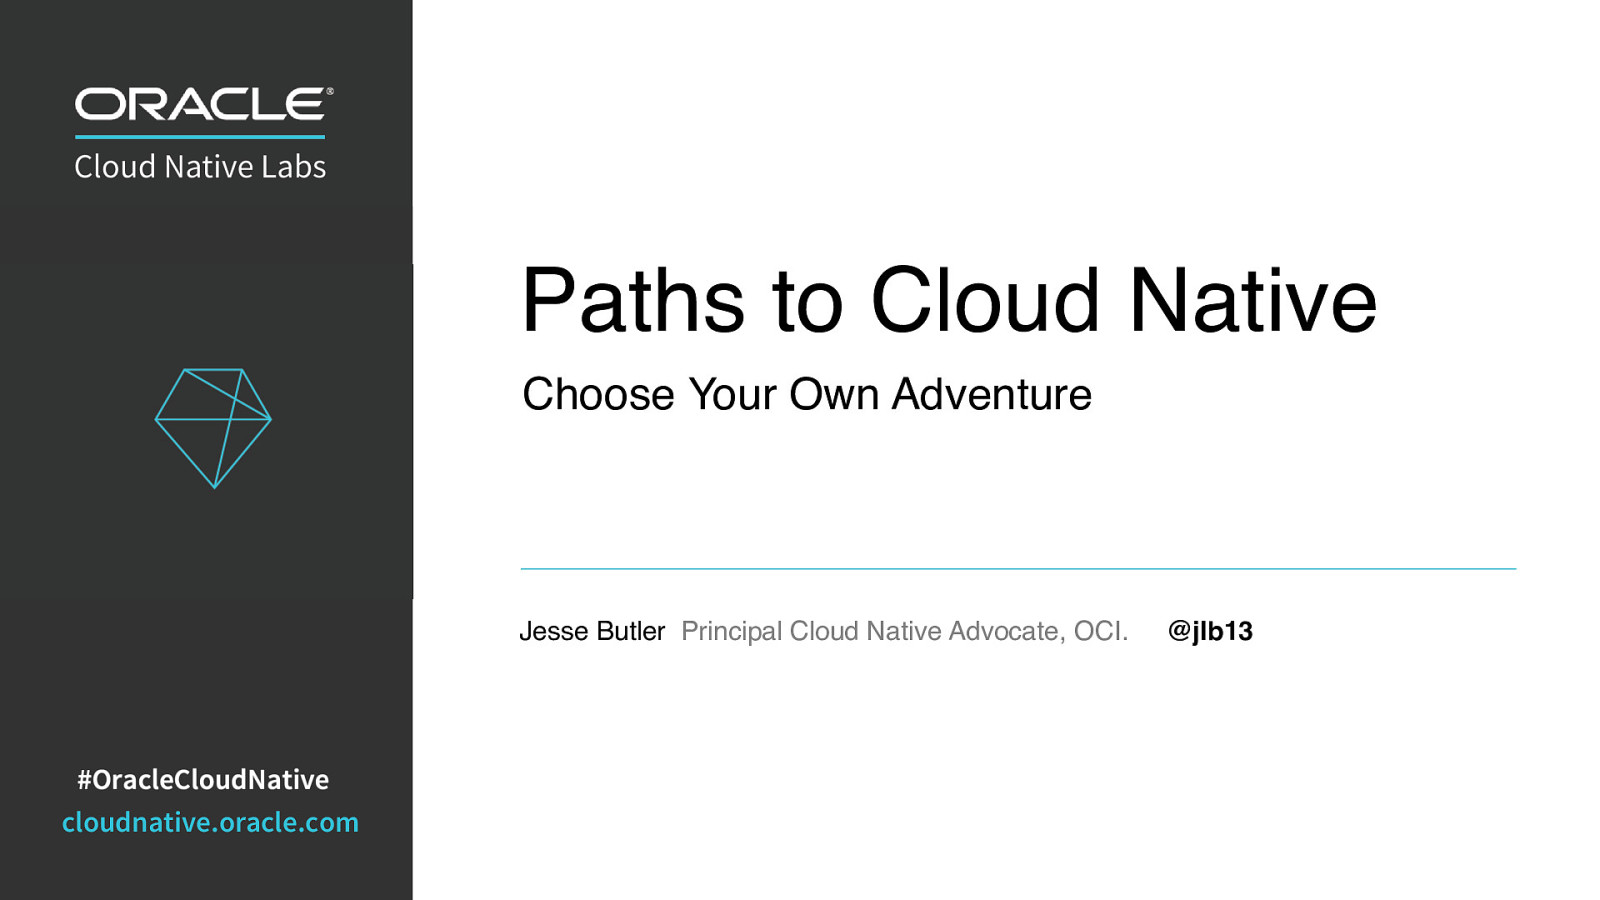 Paths to Cloud Native